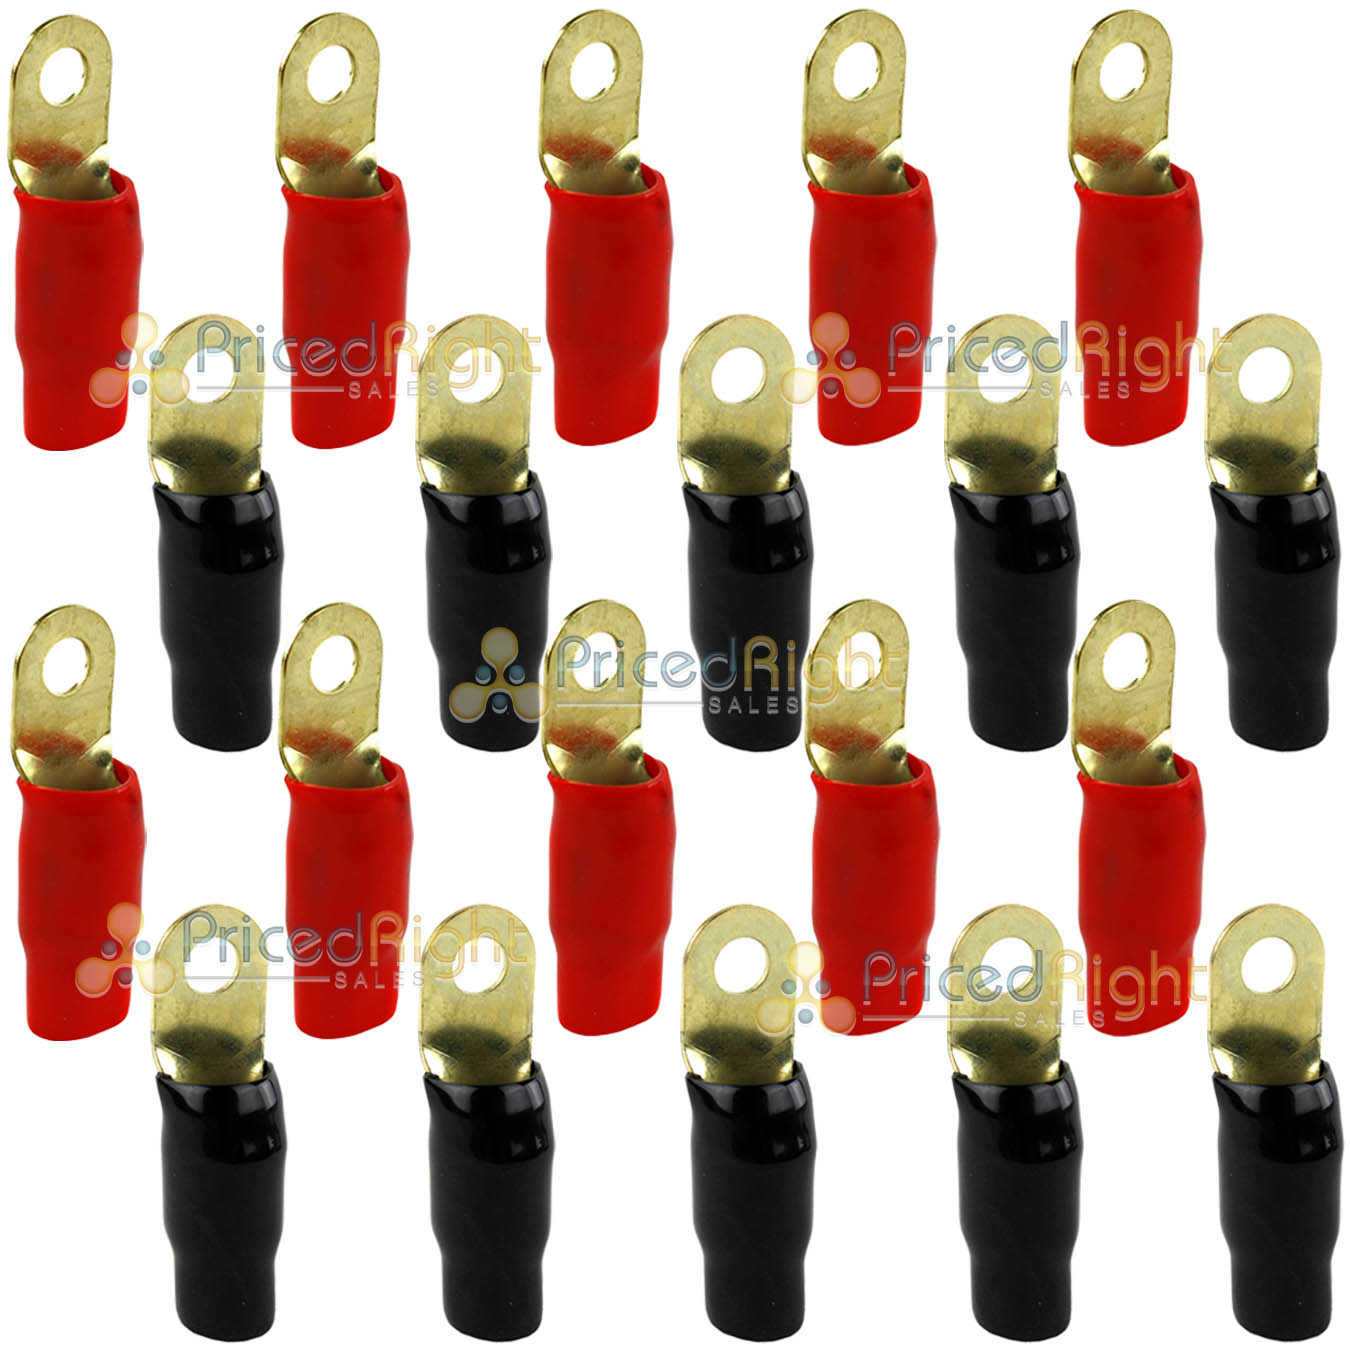 Bullz Audio Ring Terminals 1/0 Gauge 5/16" Hole Gold Plated Red Black 20 Pack